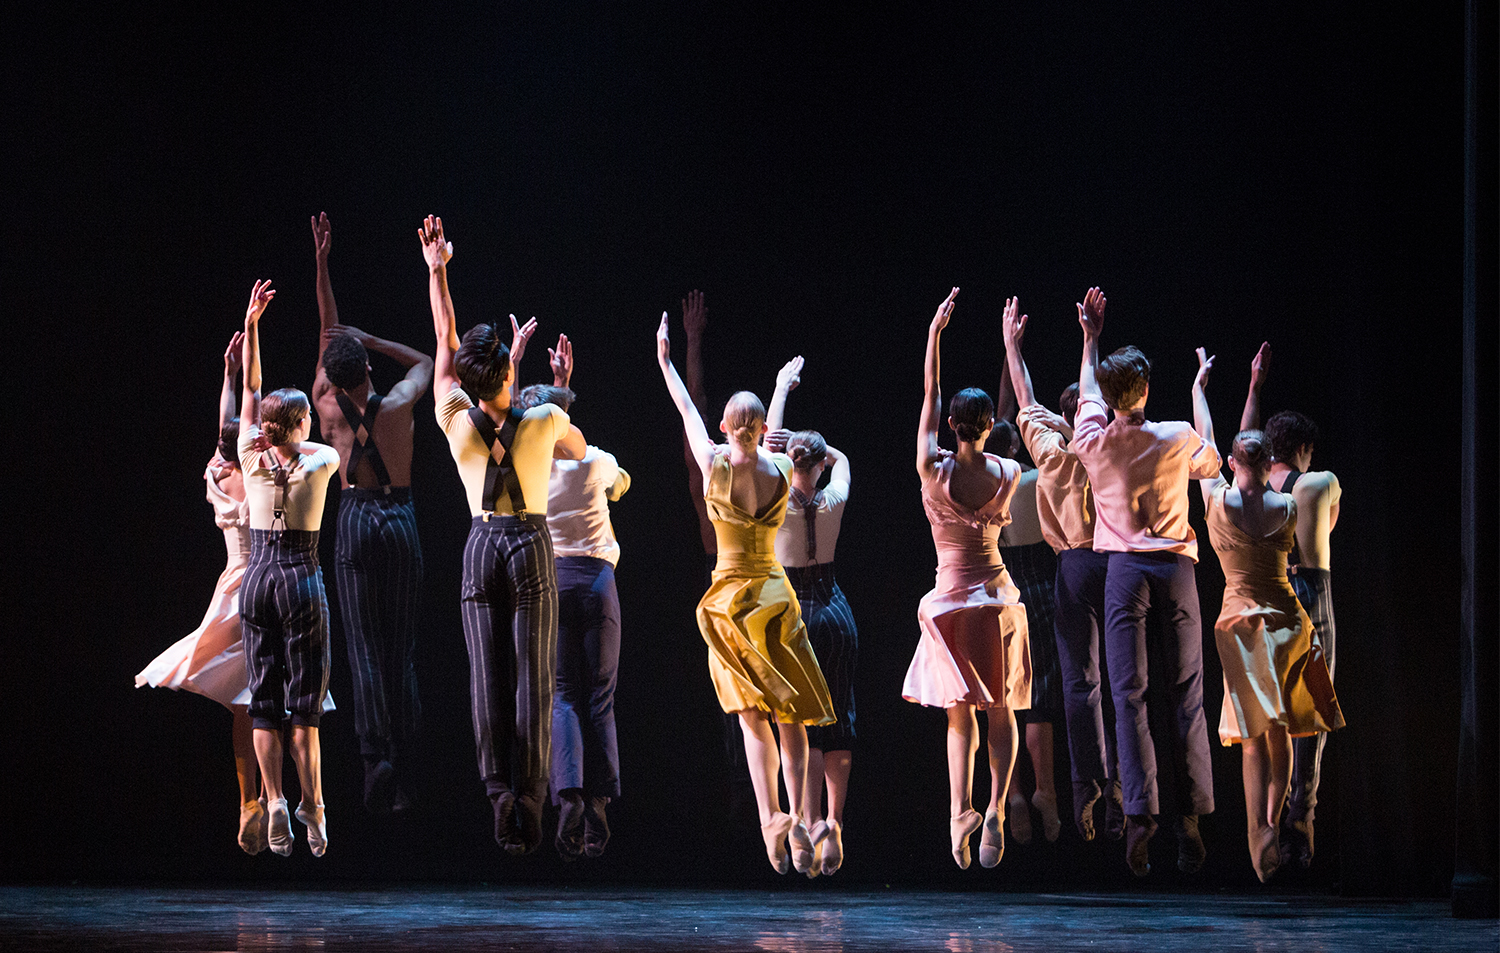 Company dancers in "Rigged Games." Choreography by Nayon Iovino. Photo by Alexander Iziliaev.